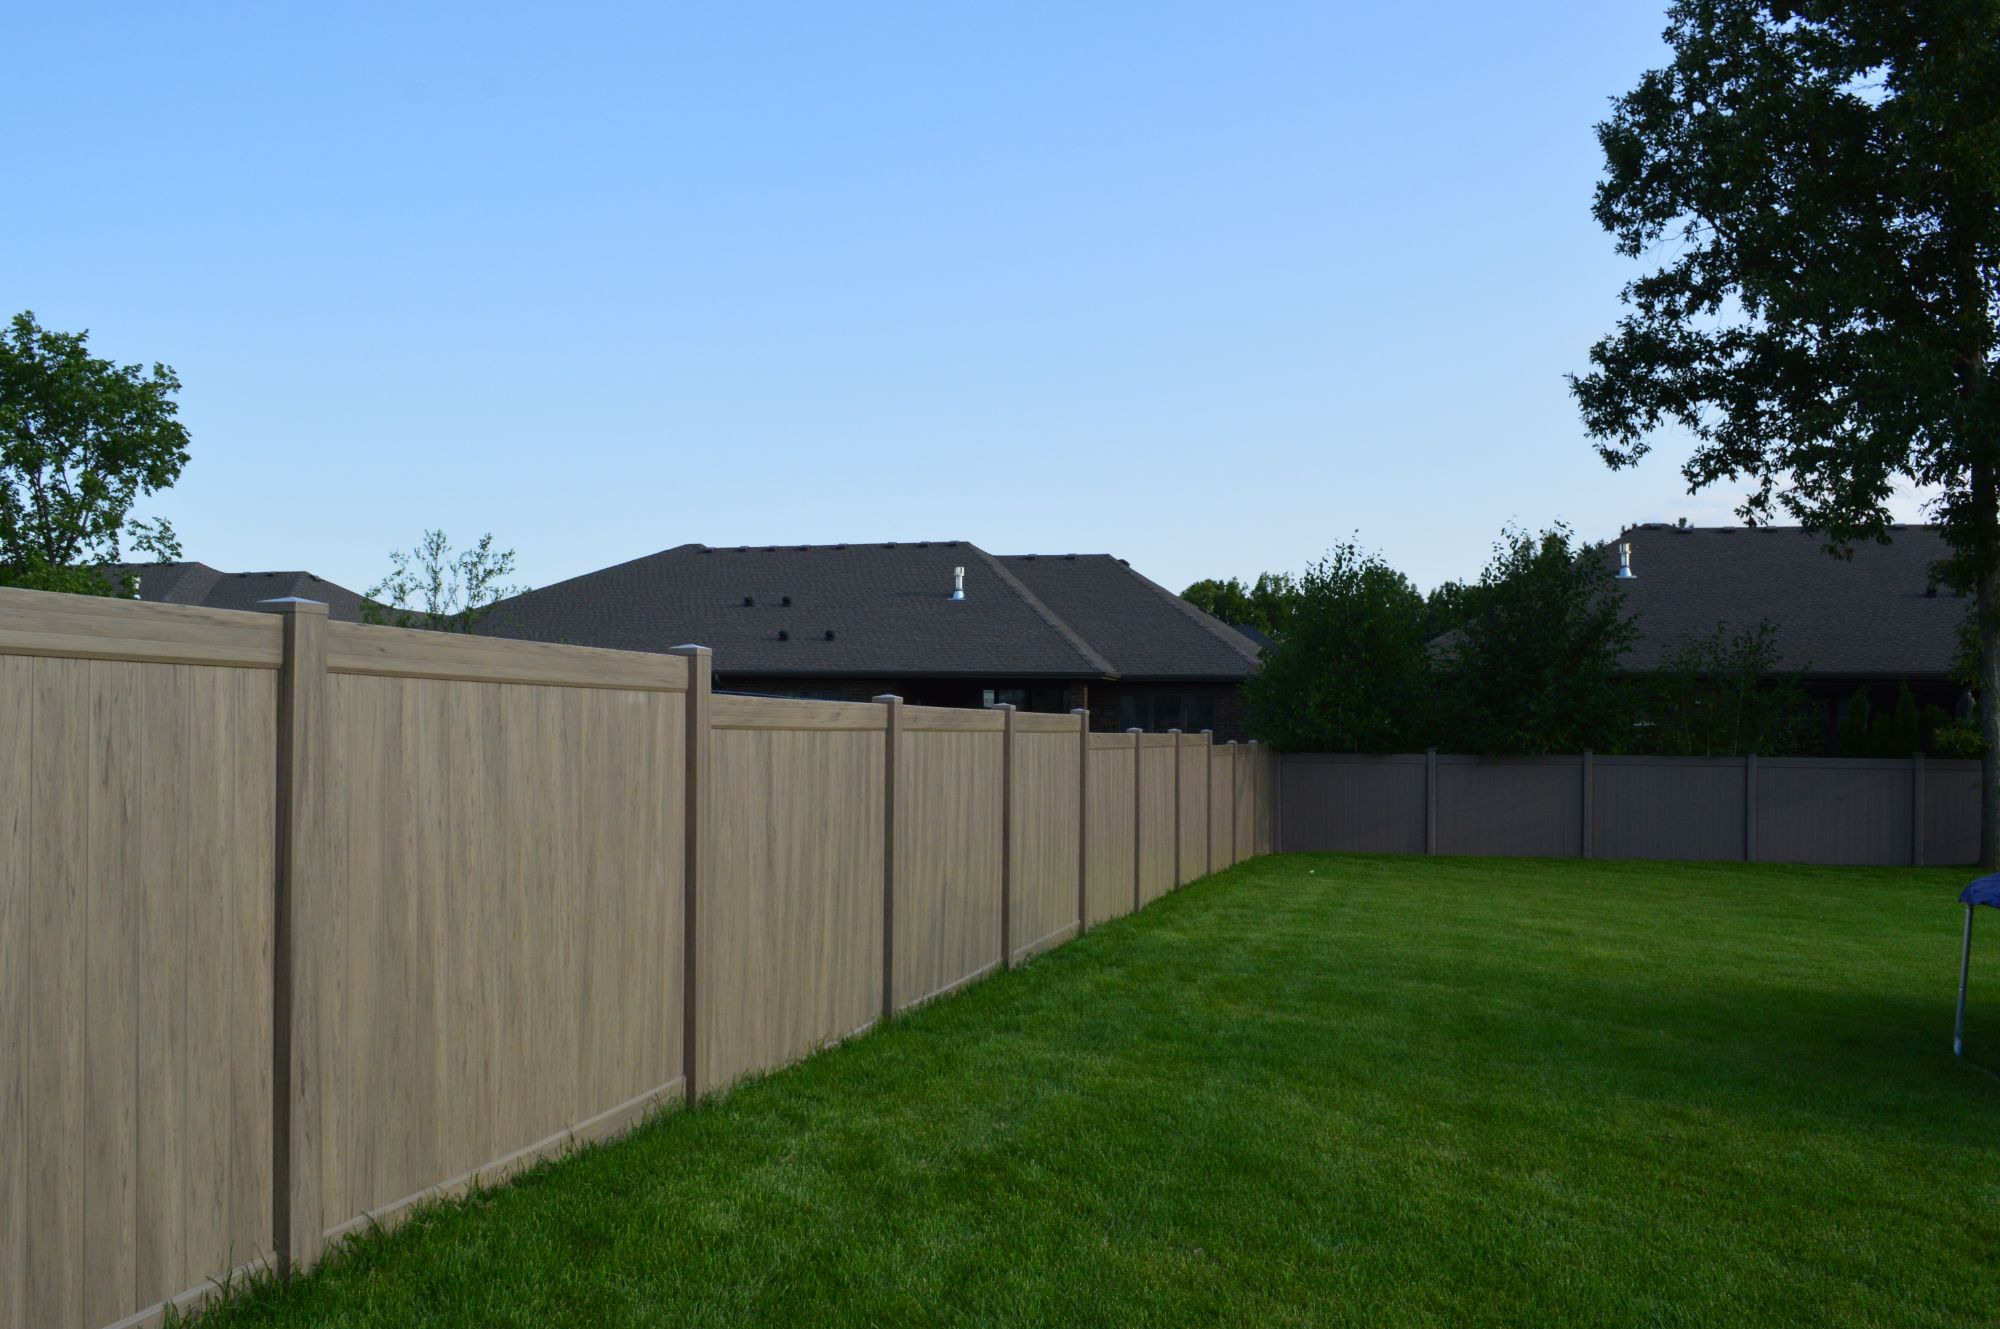 PVC Vinyl fence in Teak. One of the benefits of Green Teak vinyl fence is that it is a low-maintenance color. Unlike other colors, such as white or cream, Green Teak does not show dirt or debris as easily, which means that it requires less frequent cleaning and maintenance. Additionally, Green Teak is a timeless color that does not go out of style, which means that it will continue to look good for many years to come.